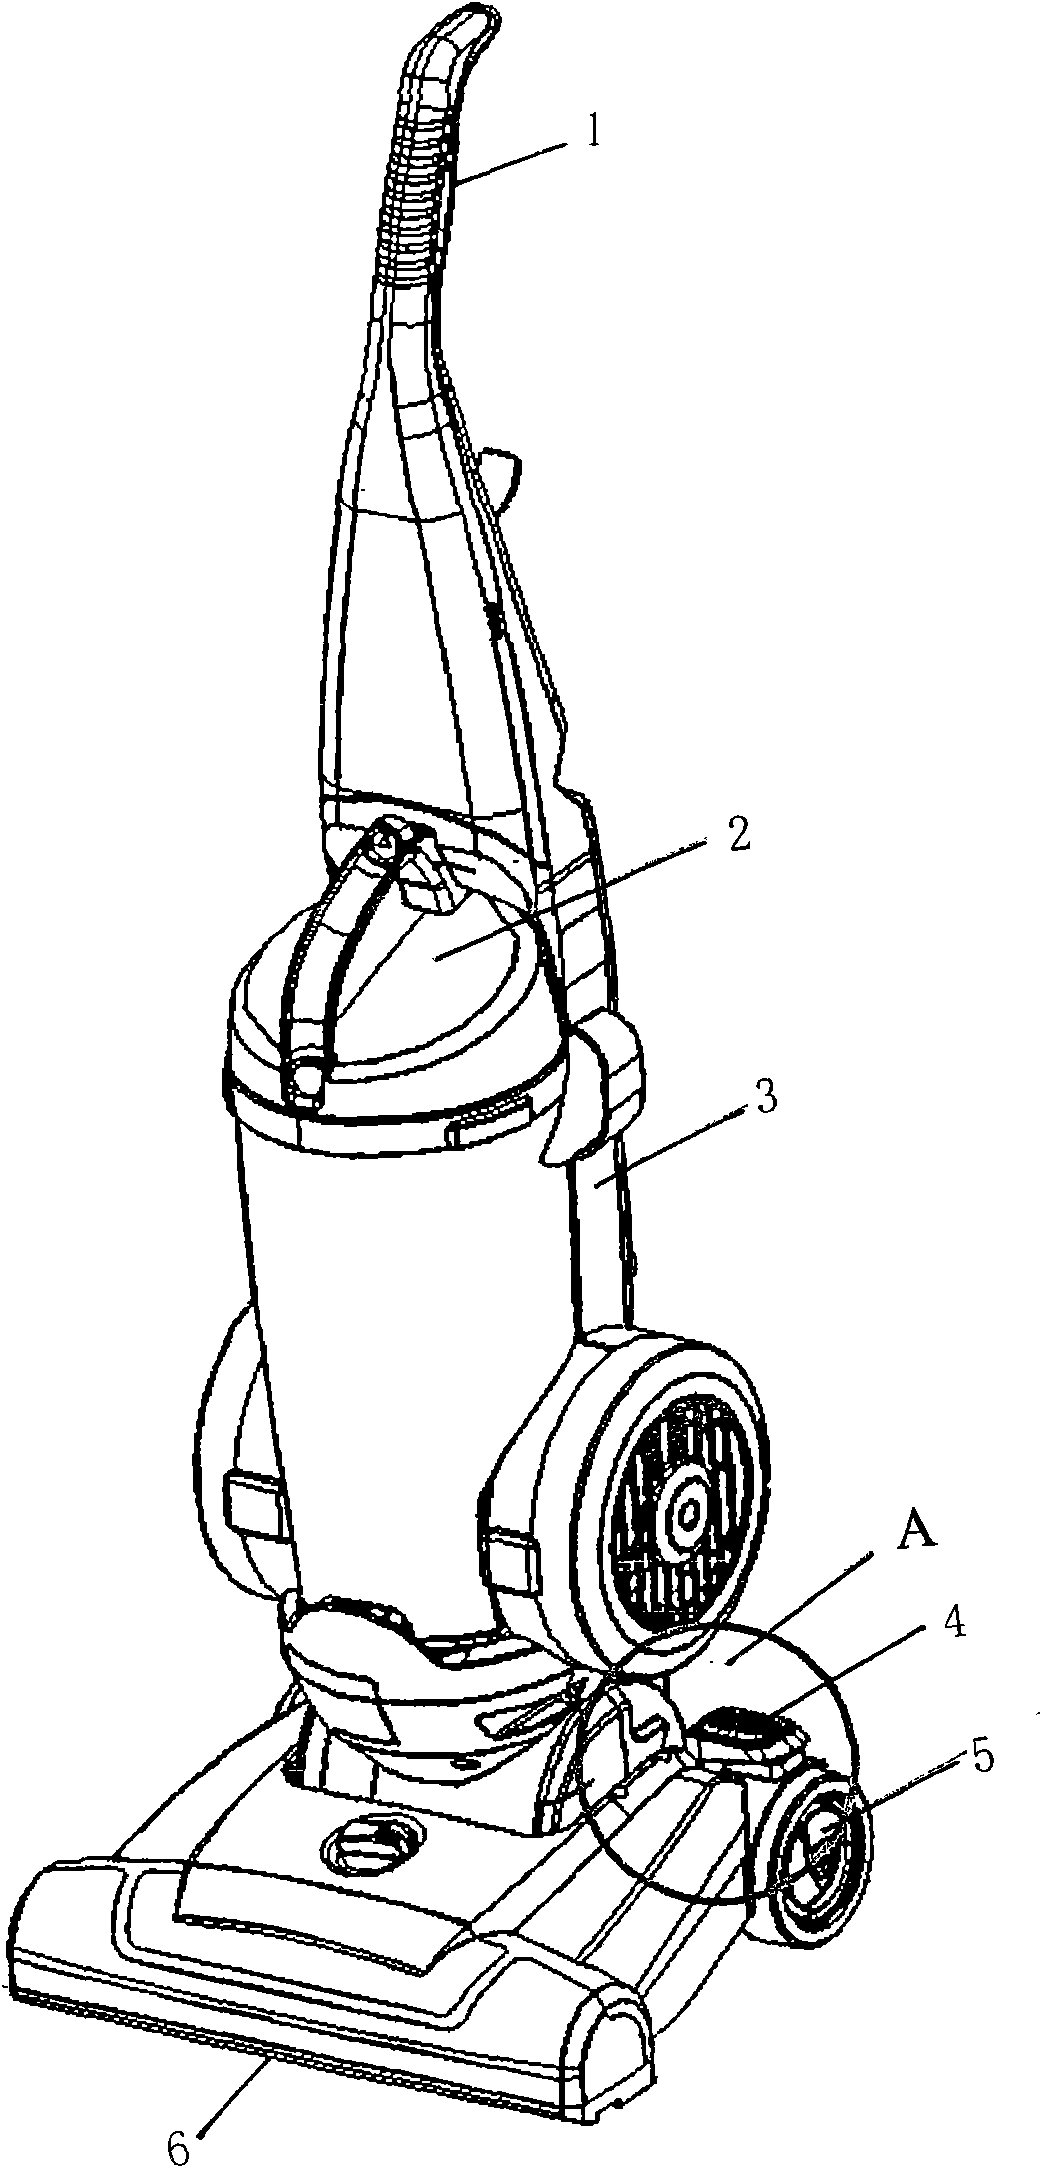 Vertical dust collector with rolling brush capable of being controlled to rotate